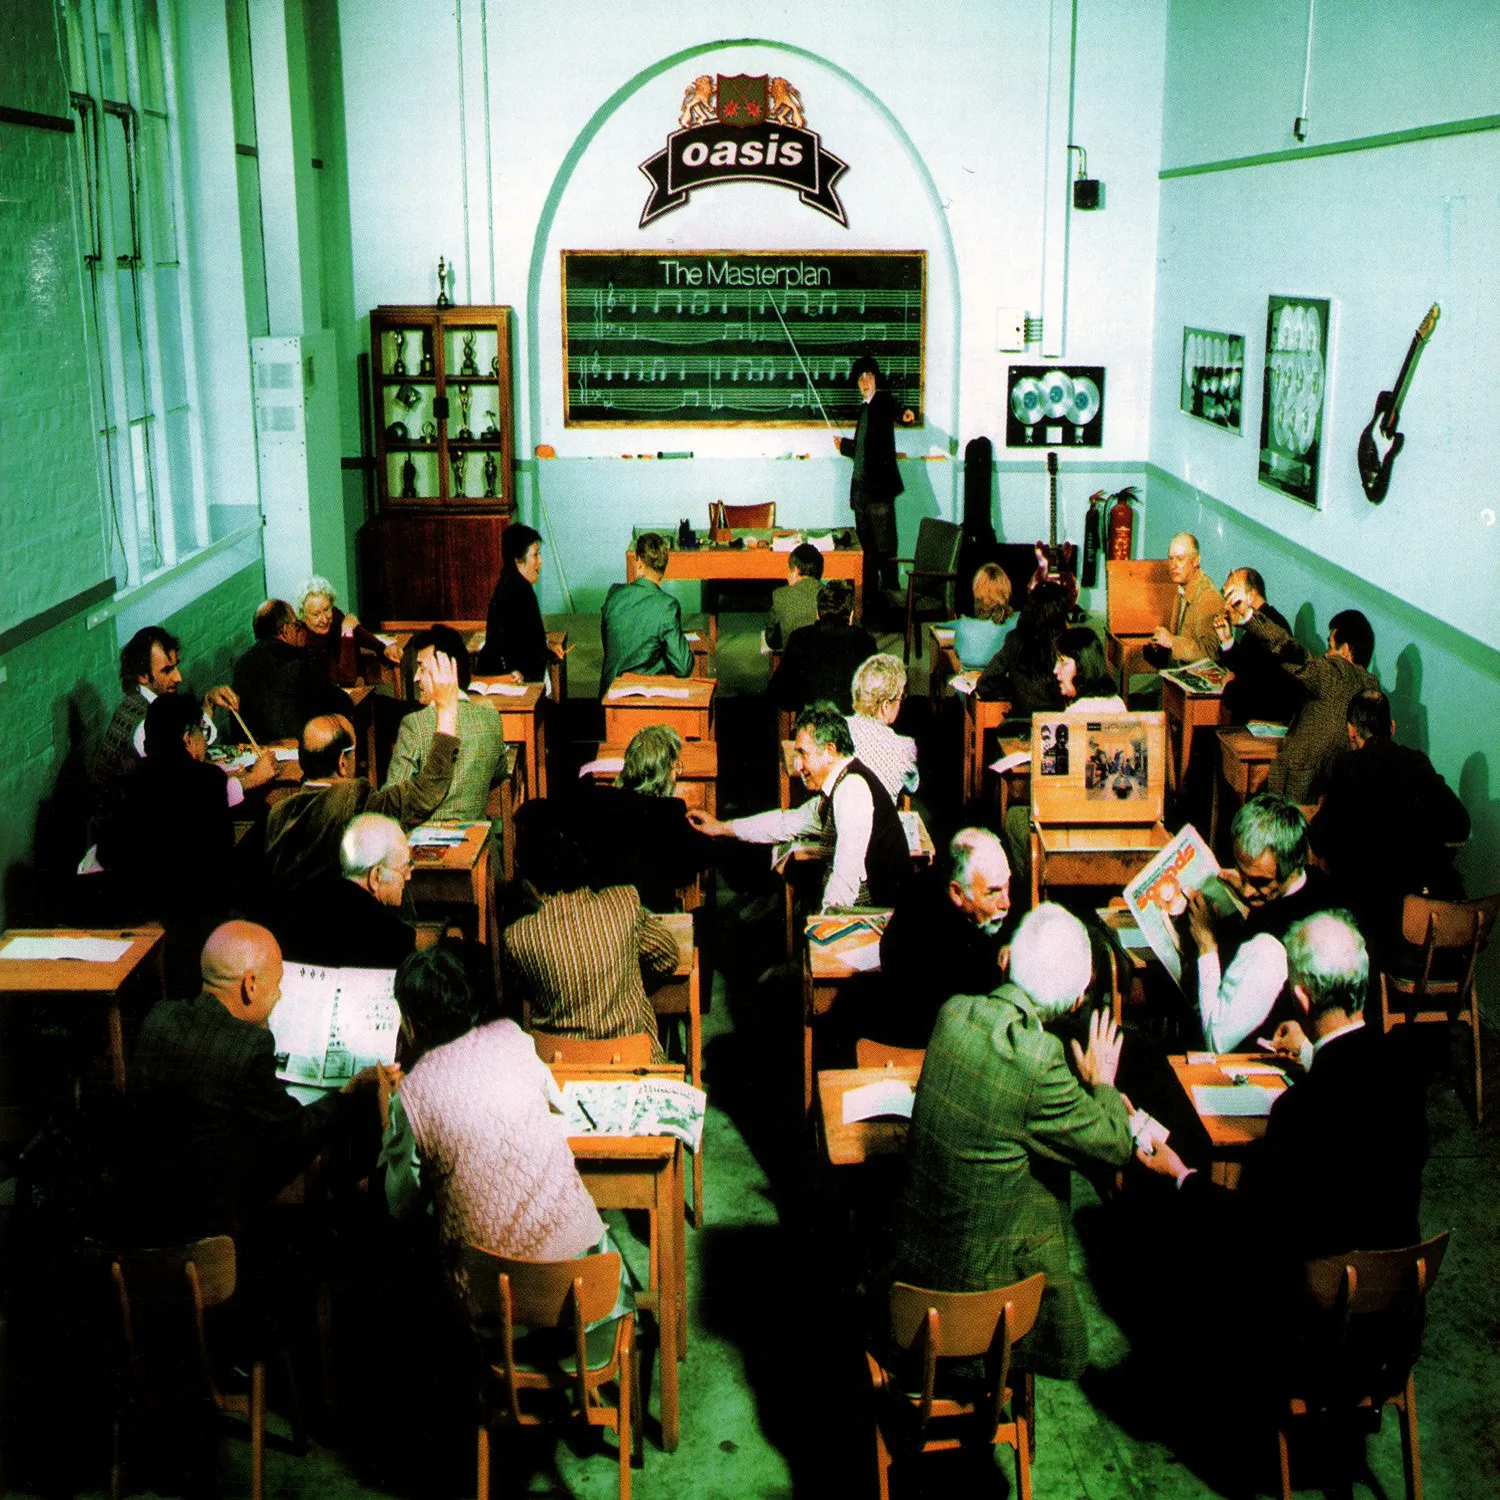 <strong>Oasis - The Masterplan</strong> (Vinyl LP - black)